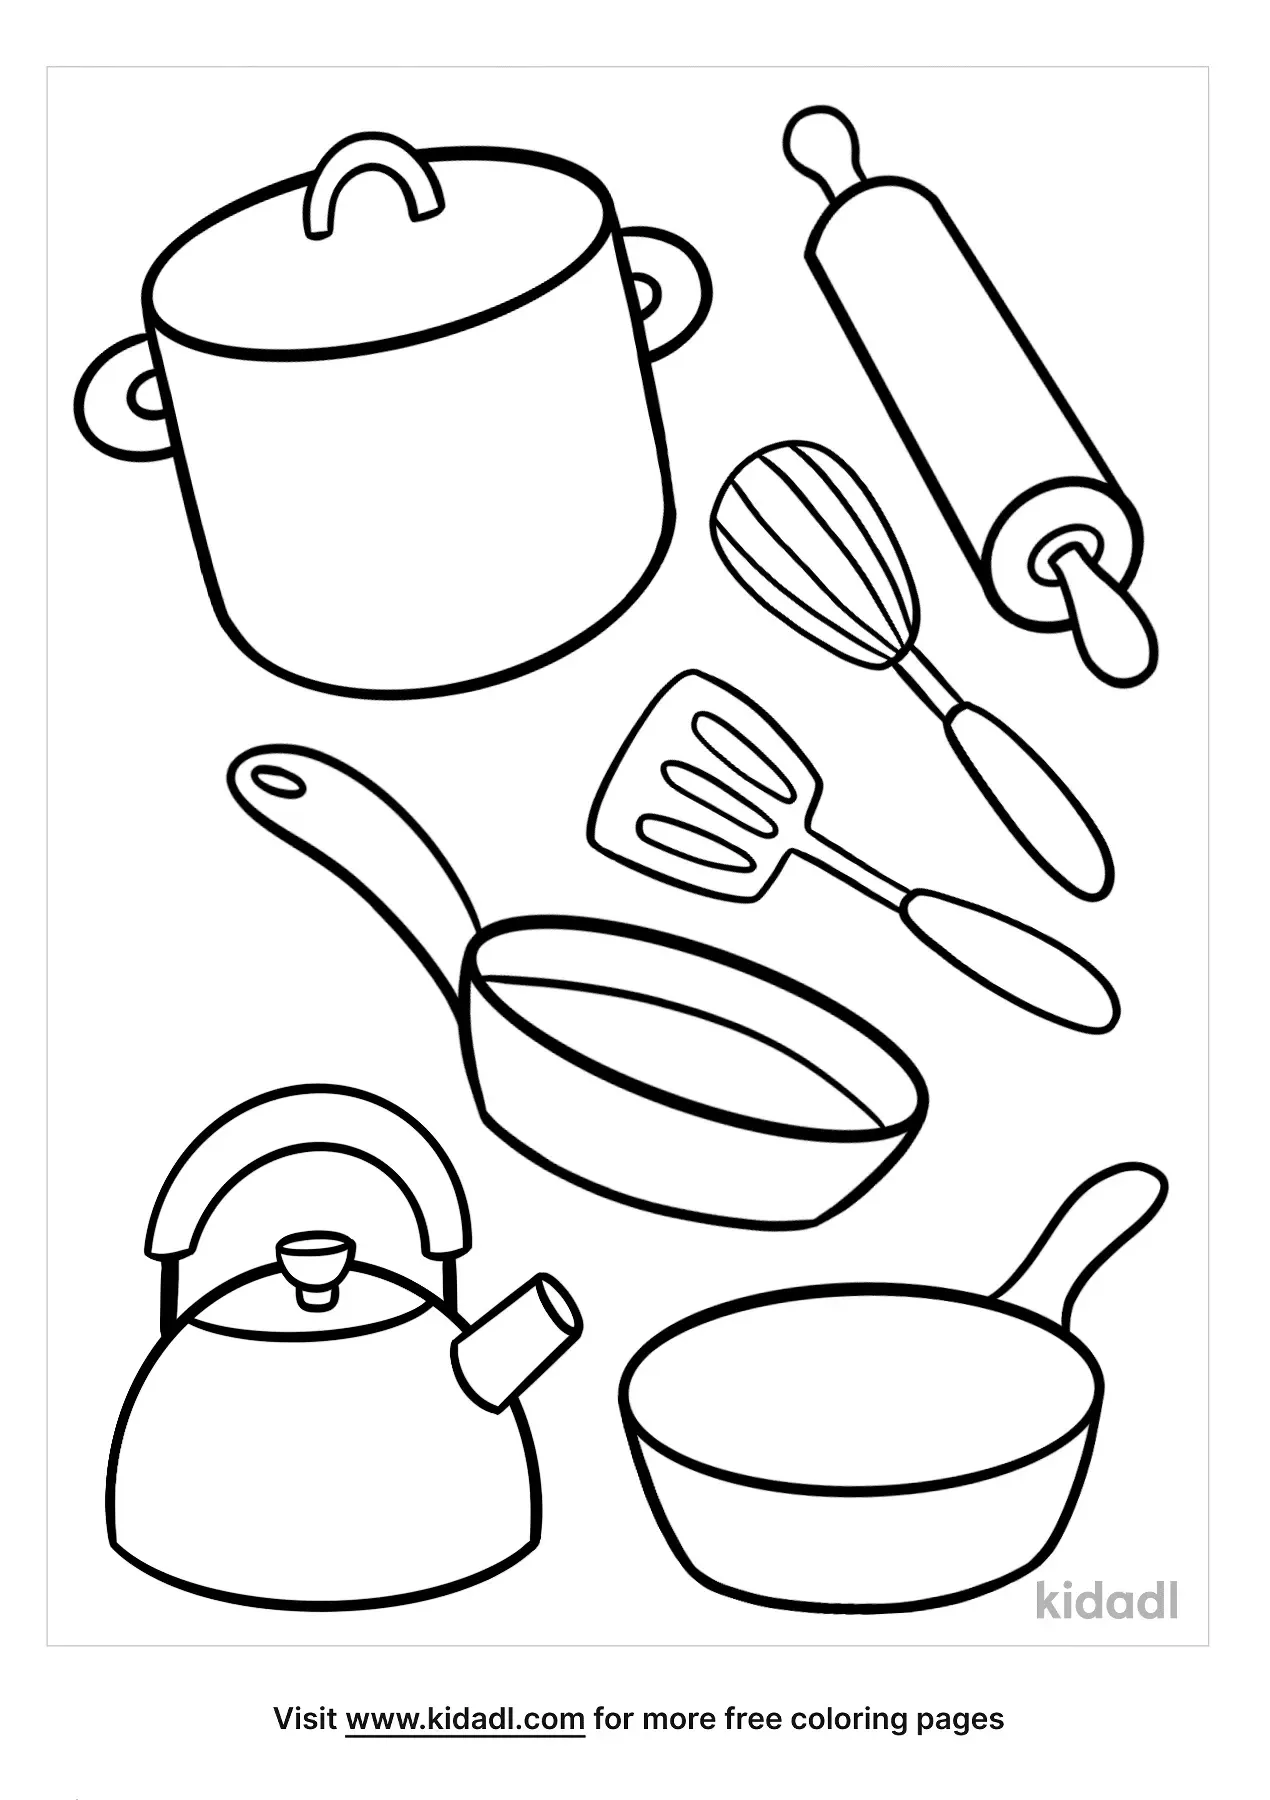 Kitchen Tools Coloring page for Kids  Painting and Drawing for Toddlers 